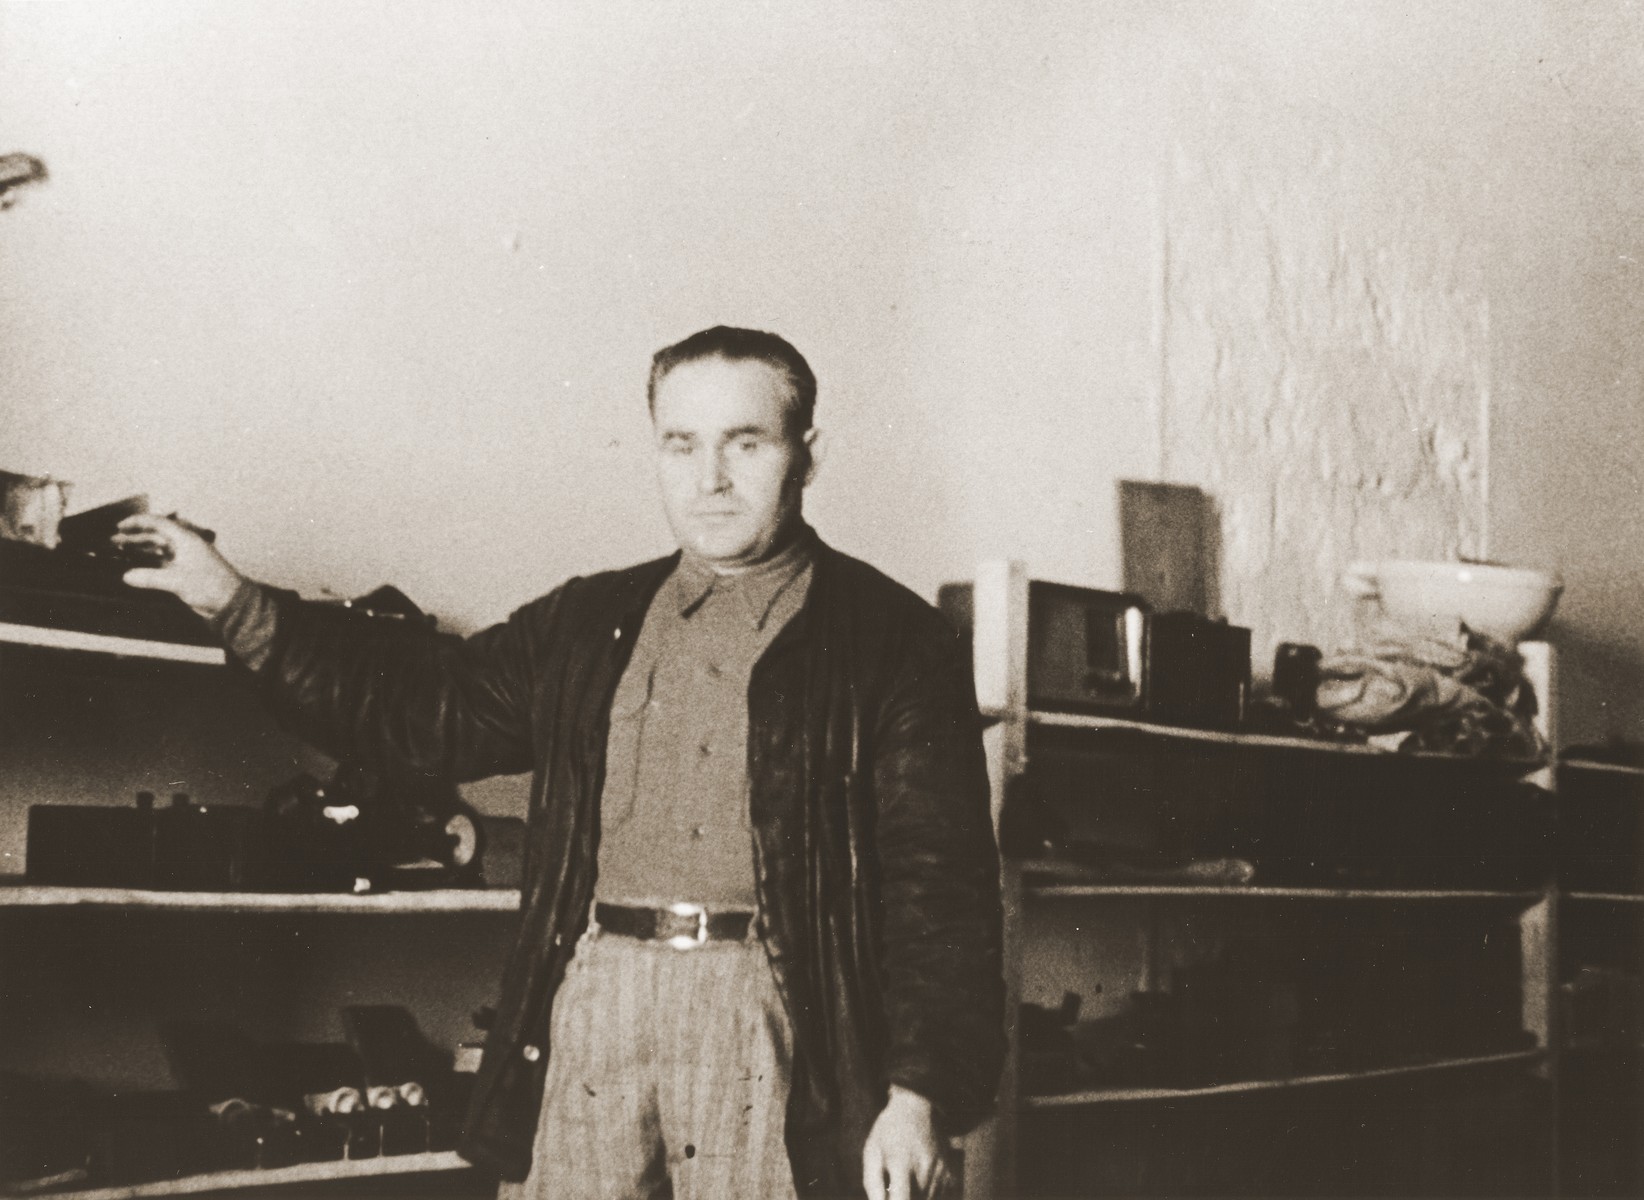 Portrait of a Jewish DP working at the ORT warehouse in the Cremona displaced persons camp.

Pictured is Motel Leikach.